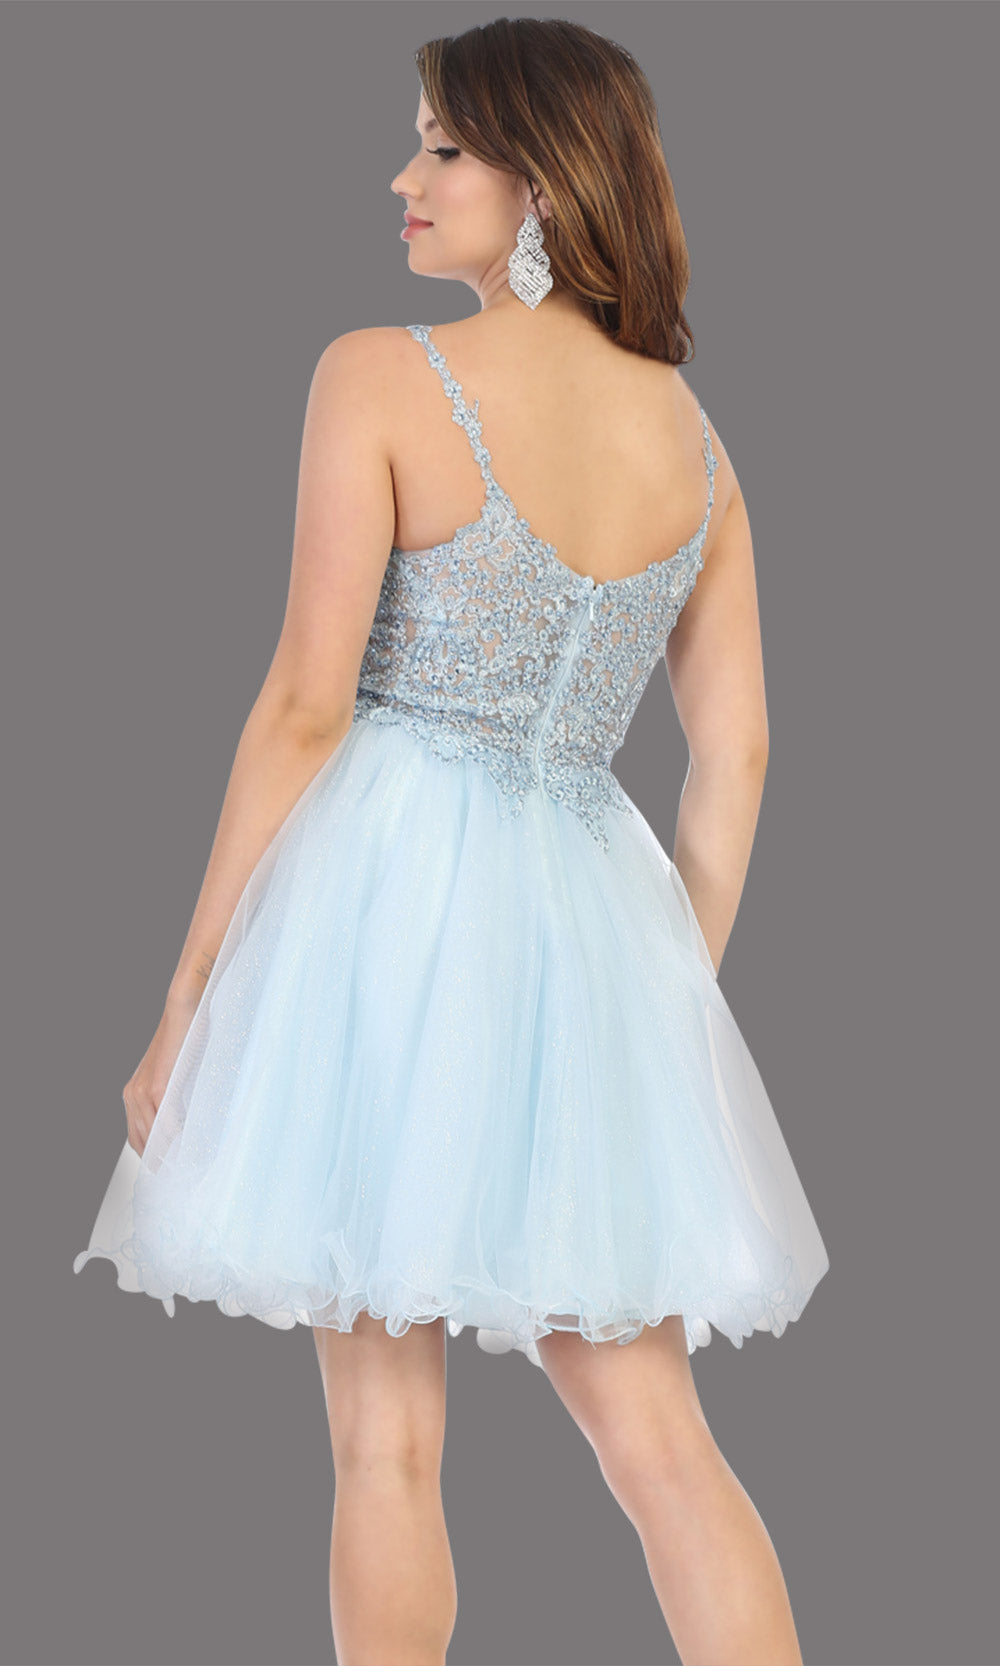 Mayqueen Mq1693 short baby blue flowy v neck beaded sequin grade 8 graduation dress w/straps & puffy skirt. This light blue party dress is perfect for prom, graduation, grade 8 grad, confirmation dress, bat mitzvah dress, damas. Plus sizes avail-b.jpg